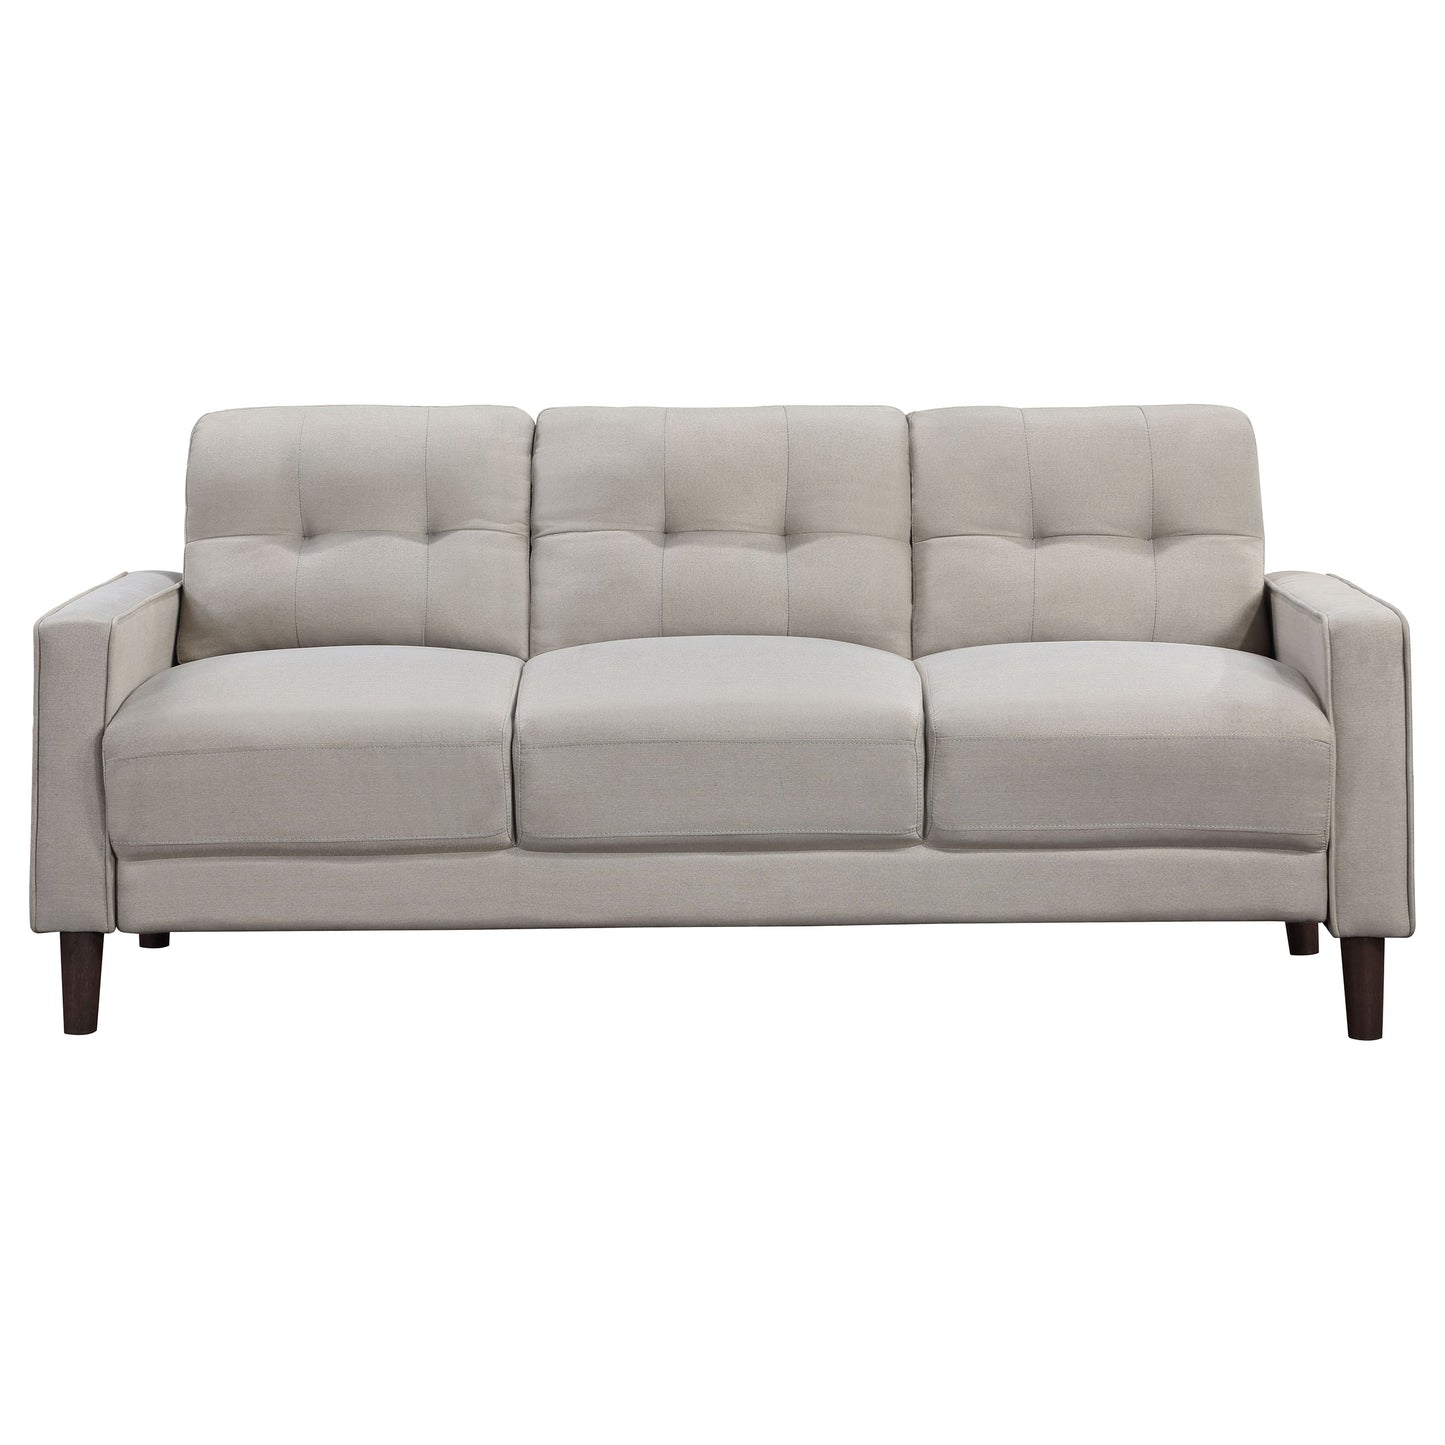 Bowen Upholstered Track Arms Tufted Sofa Beige